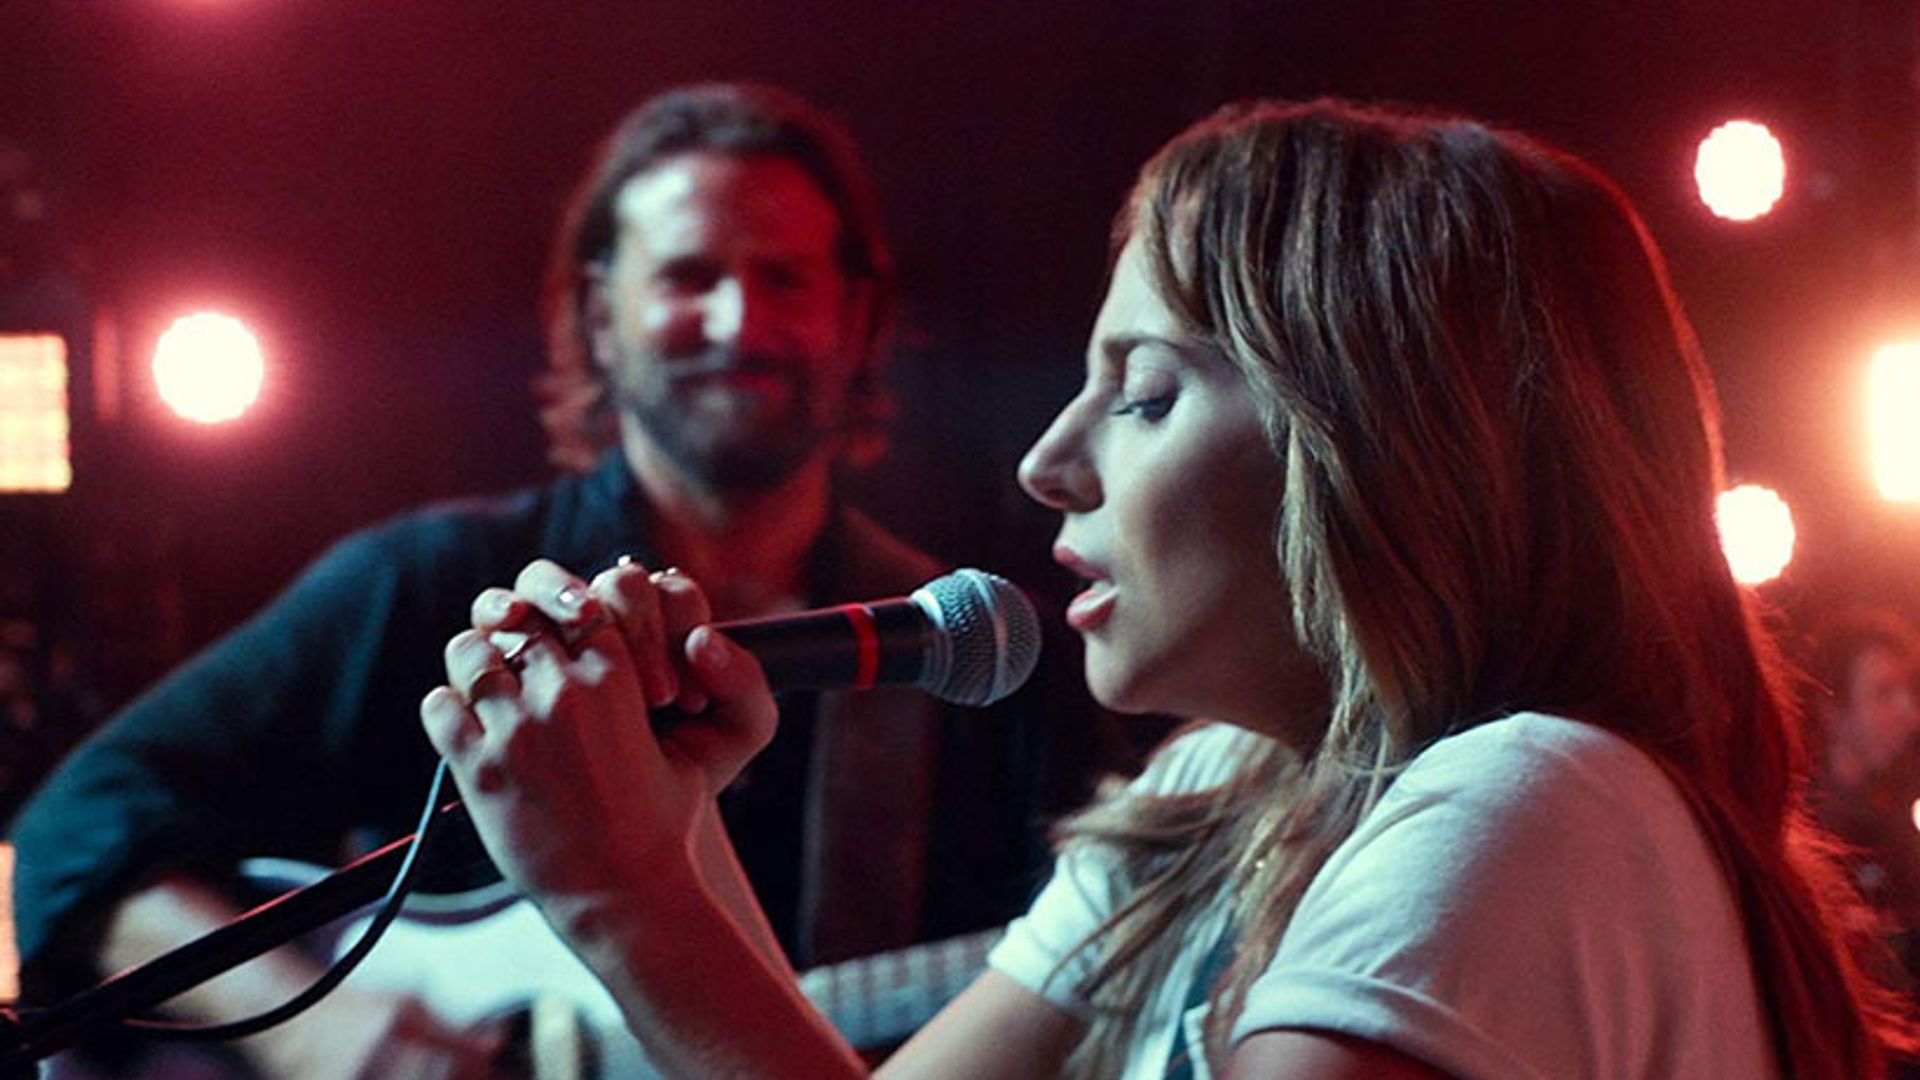 A Star Is Born: An immensely watchable, epic love story for the ages